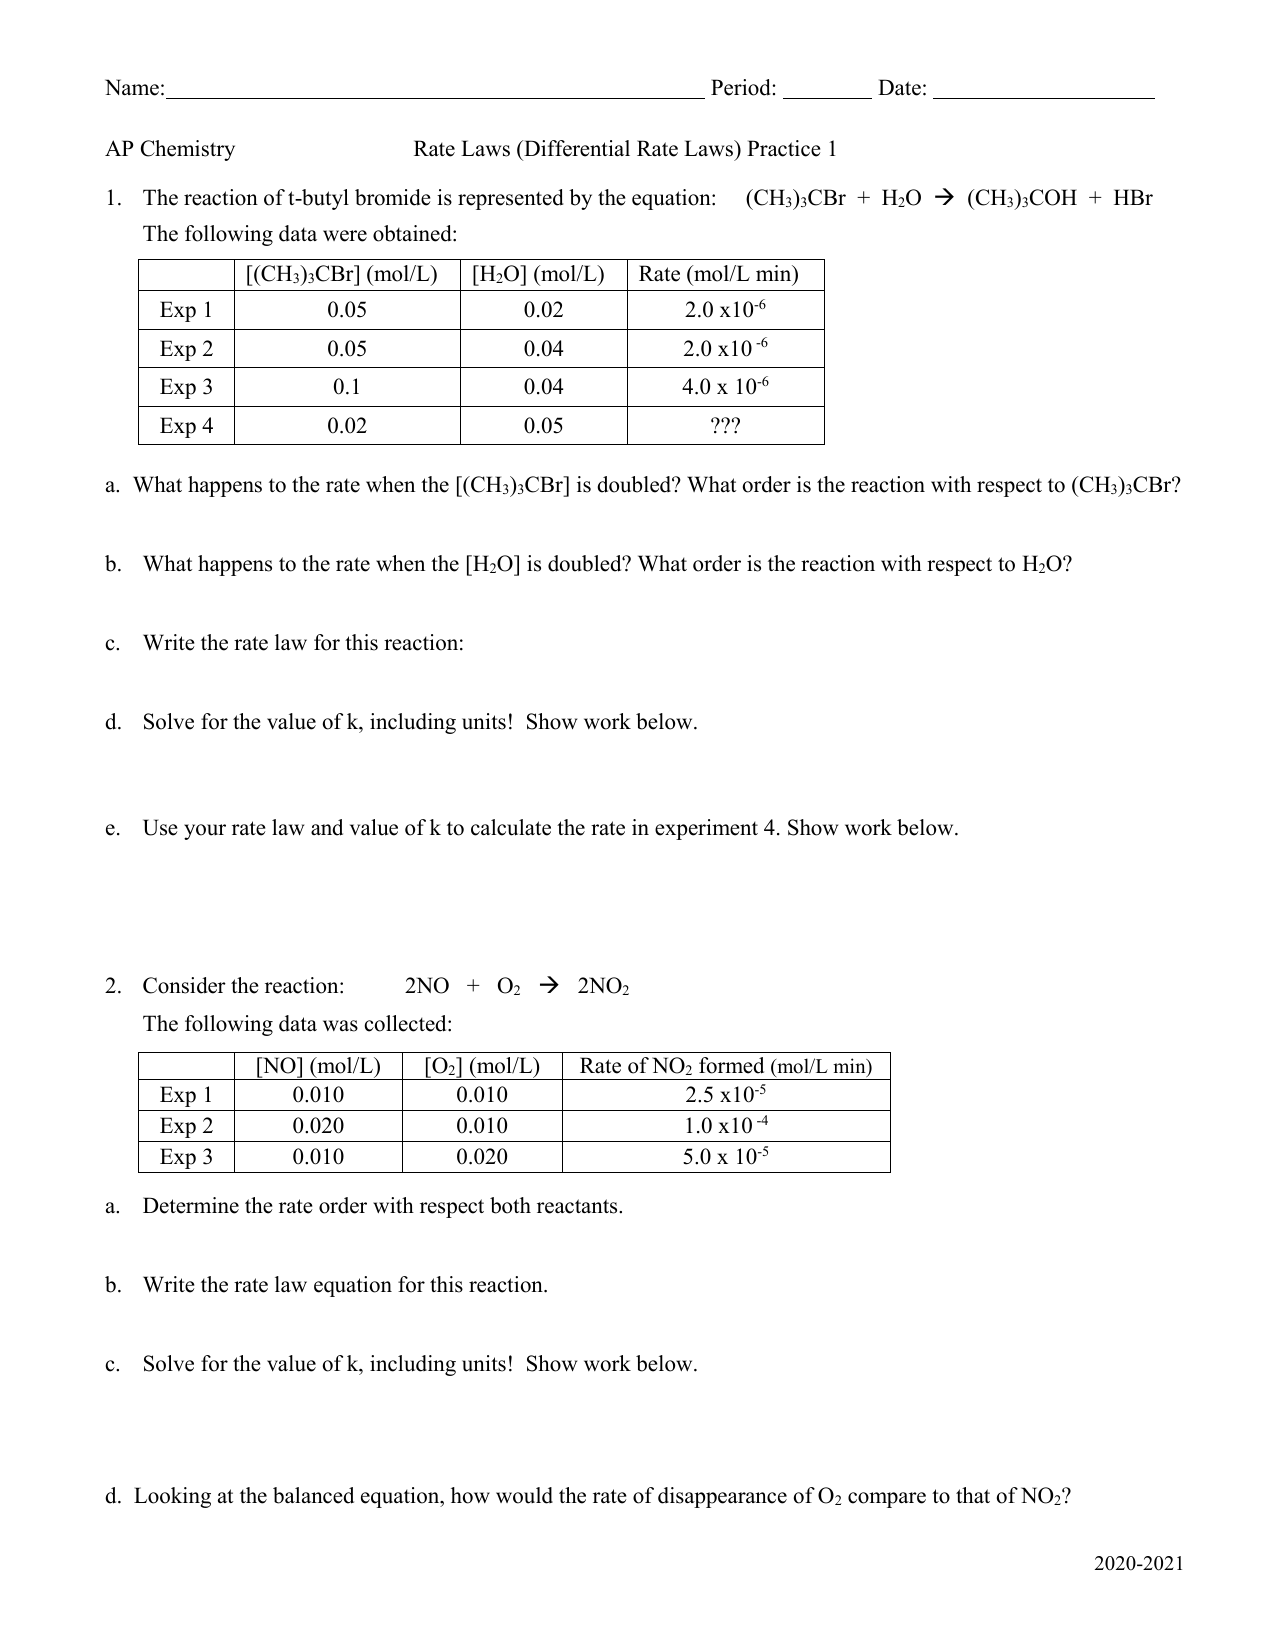 worksheet-rate-laws-differential-rate-laws-1-ap-chemistry-2020-2021-updated